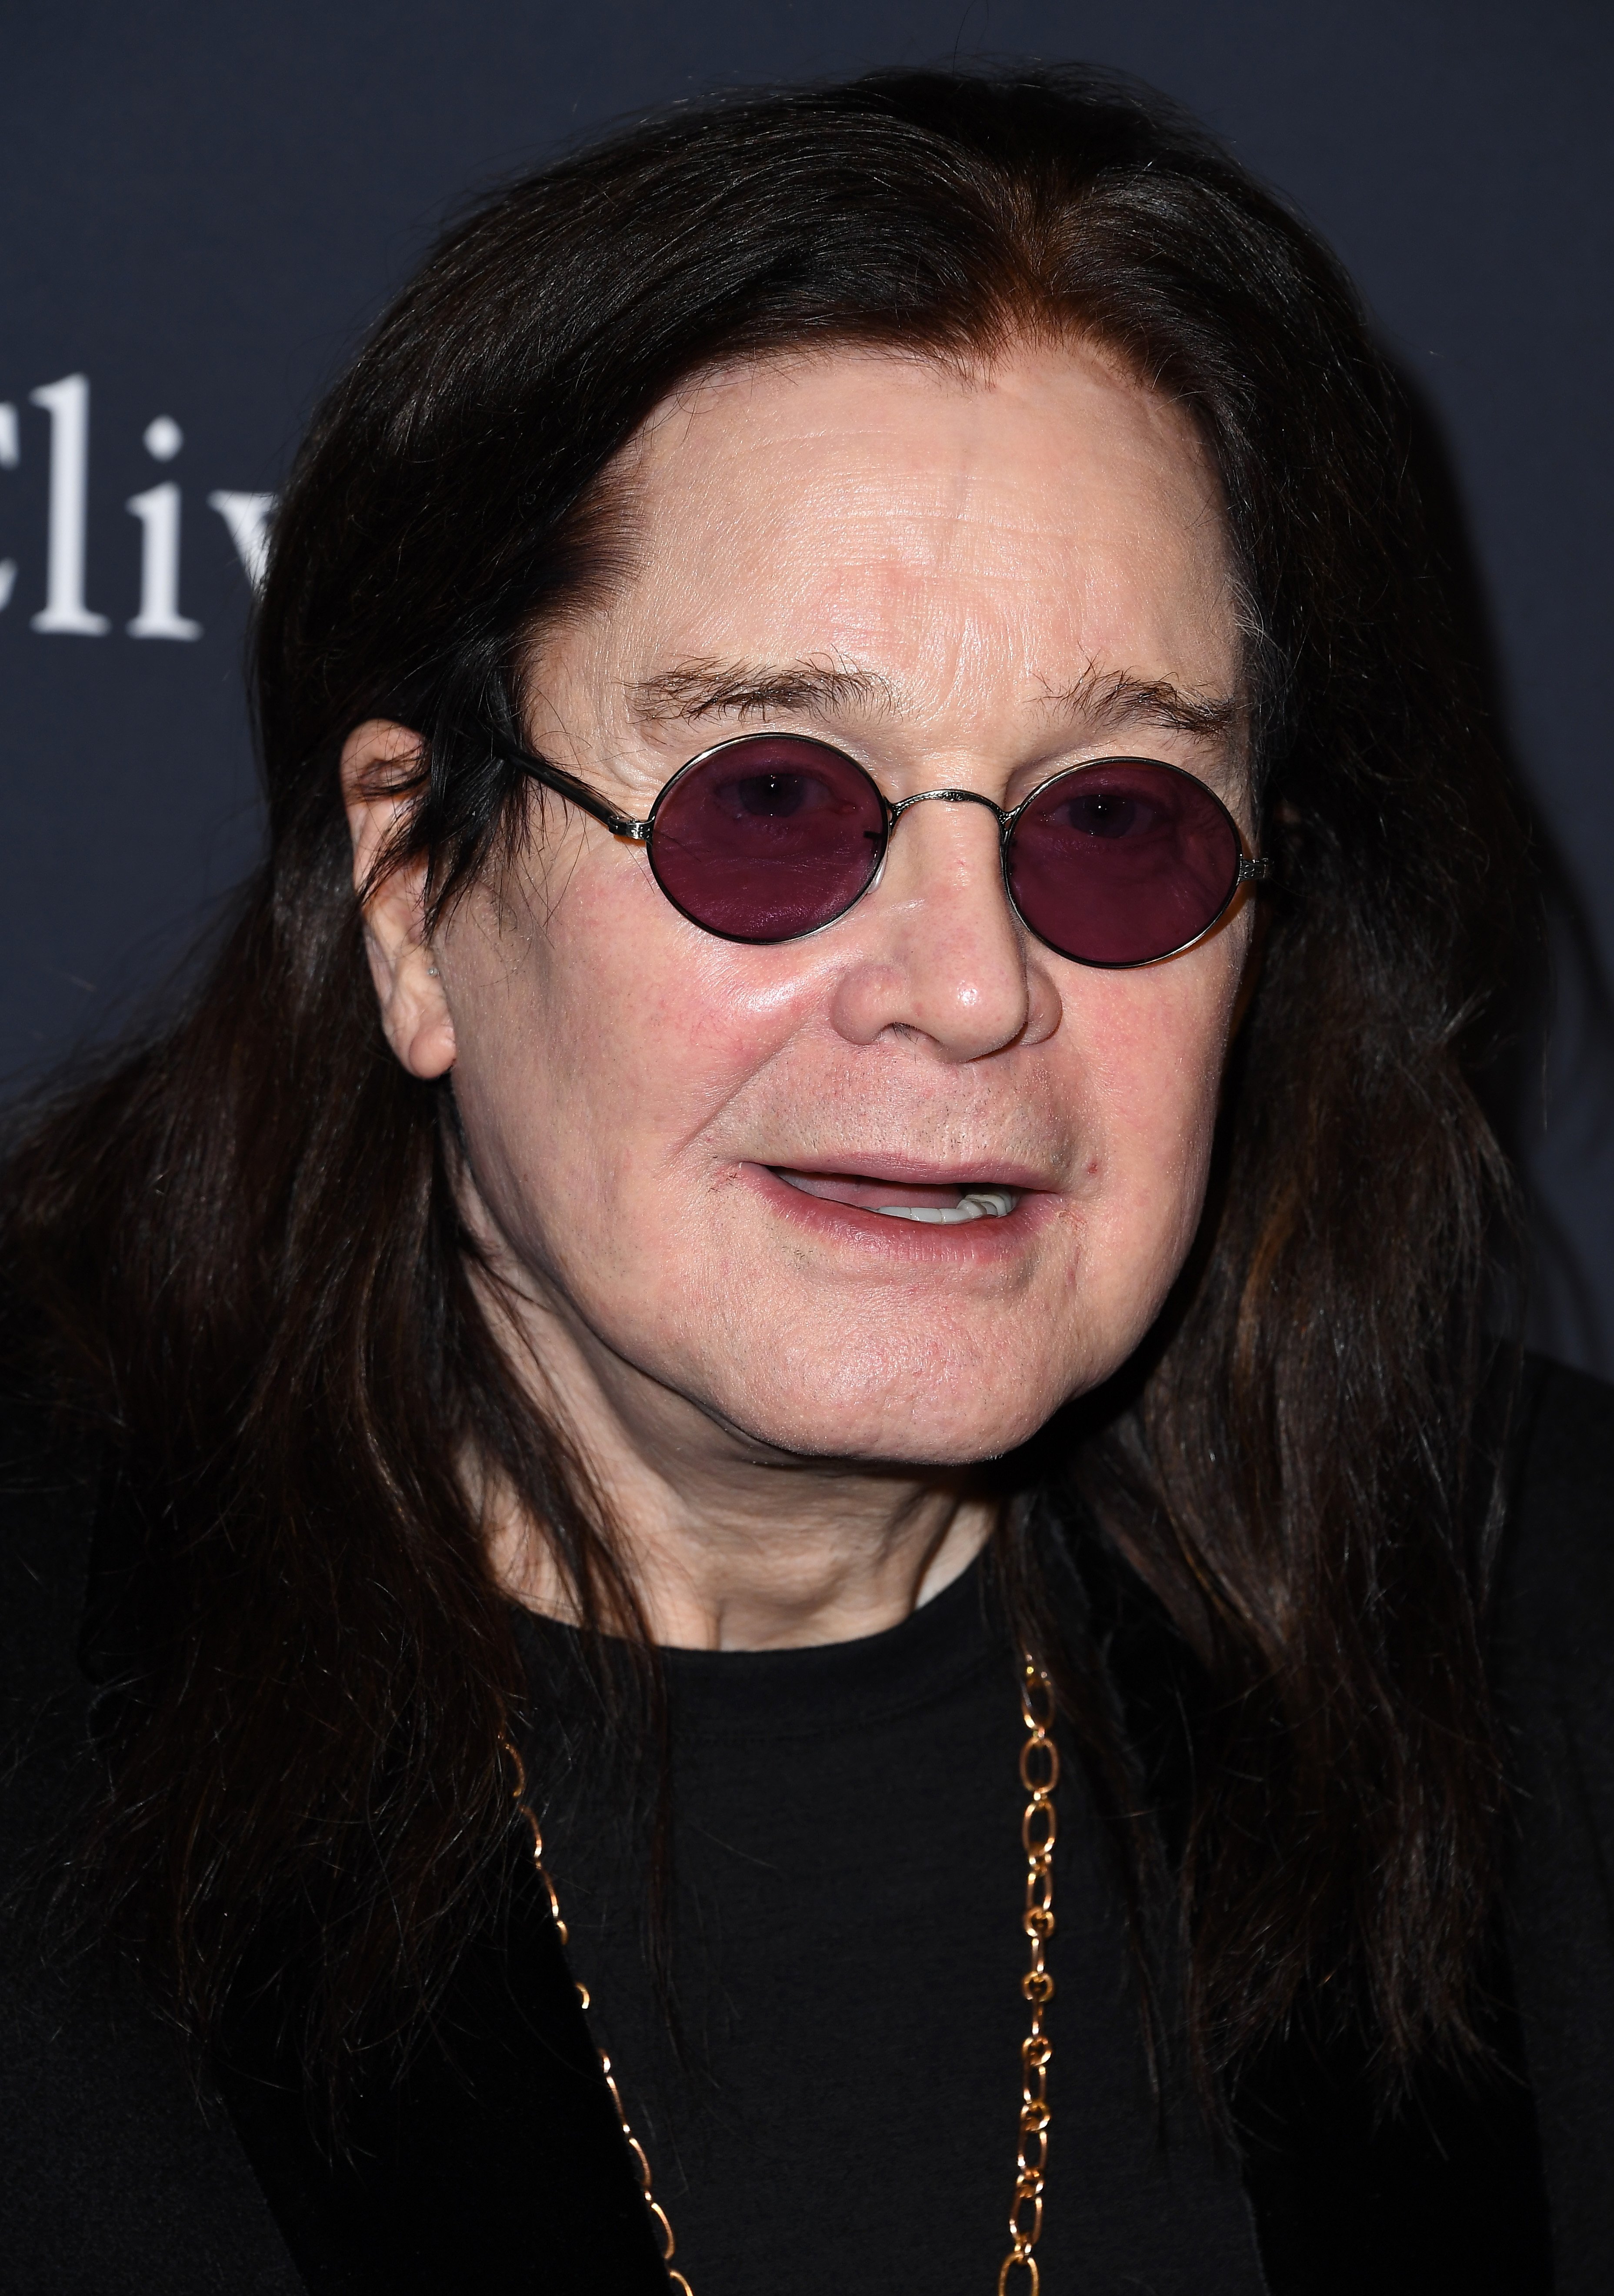 Ozzy Osbourne at the Pre-Grammy Gala and Grammy Salute to Industry Icons Honoring Sean "Diddy" Combs on January 25, 2020, in California. | Source: Getty Images